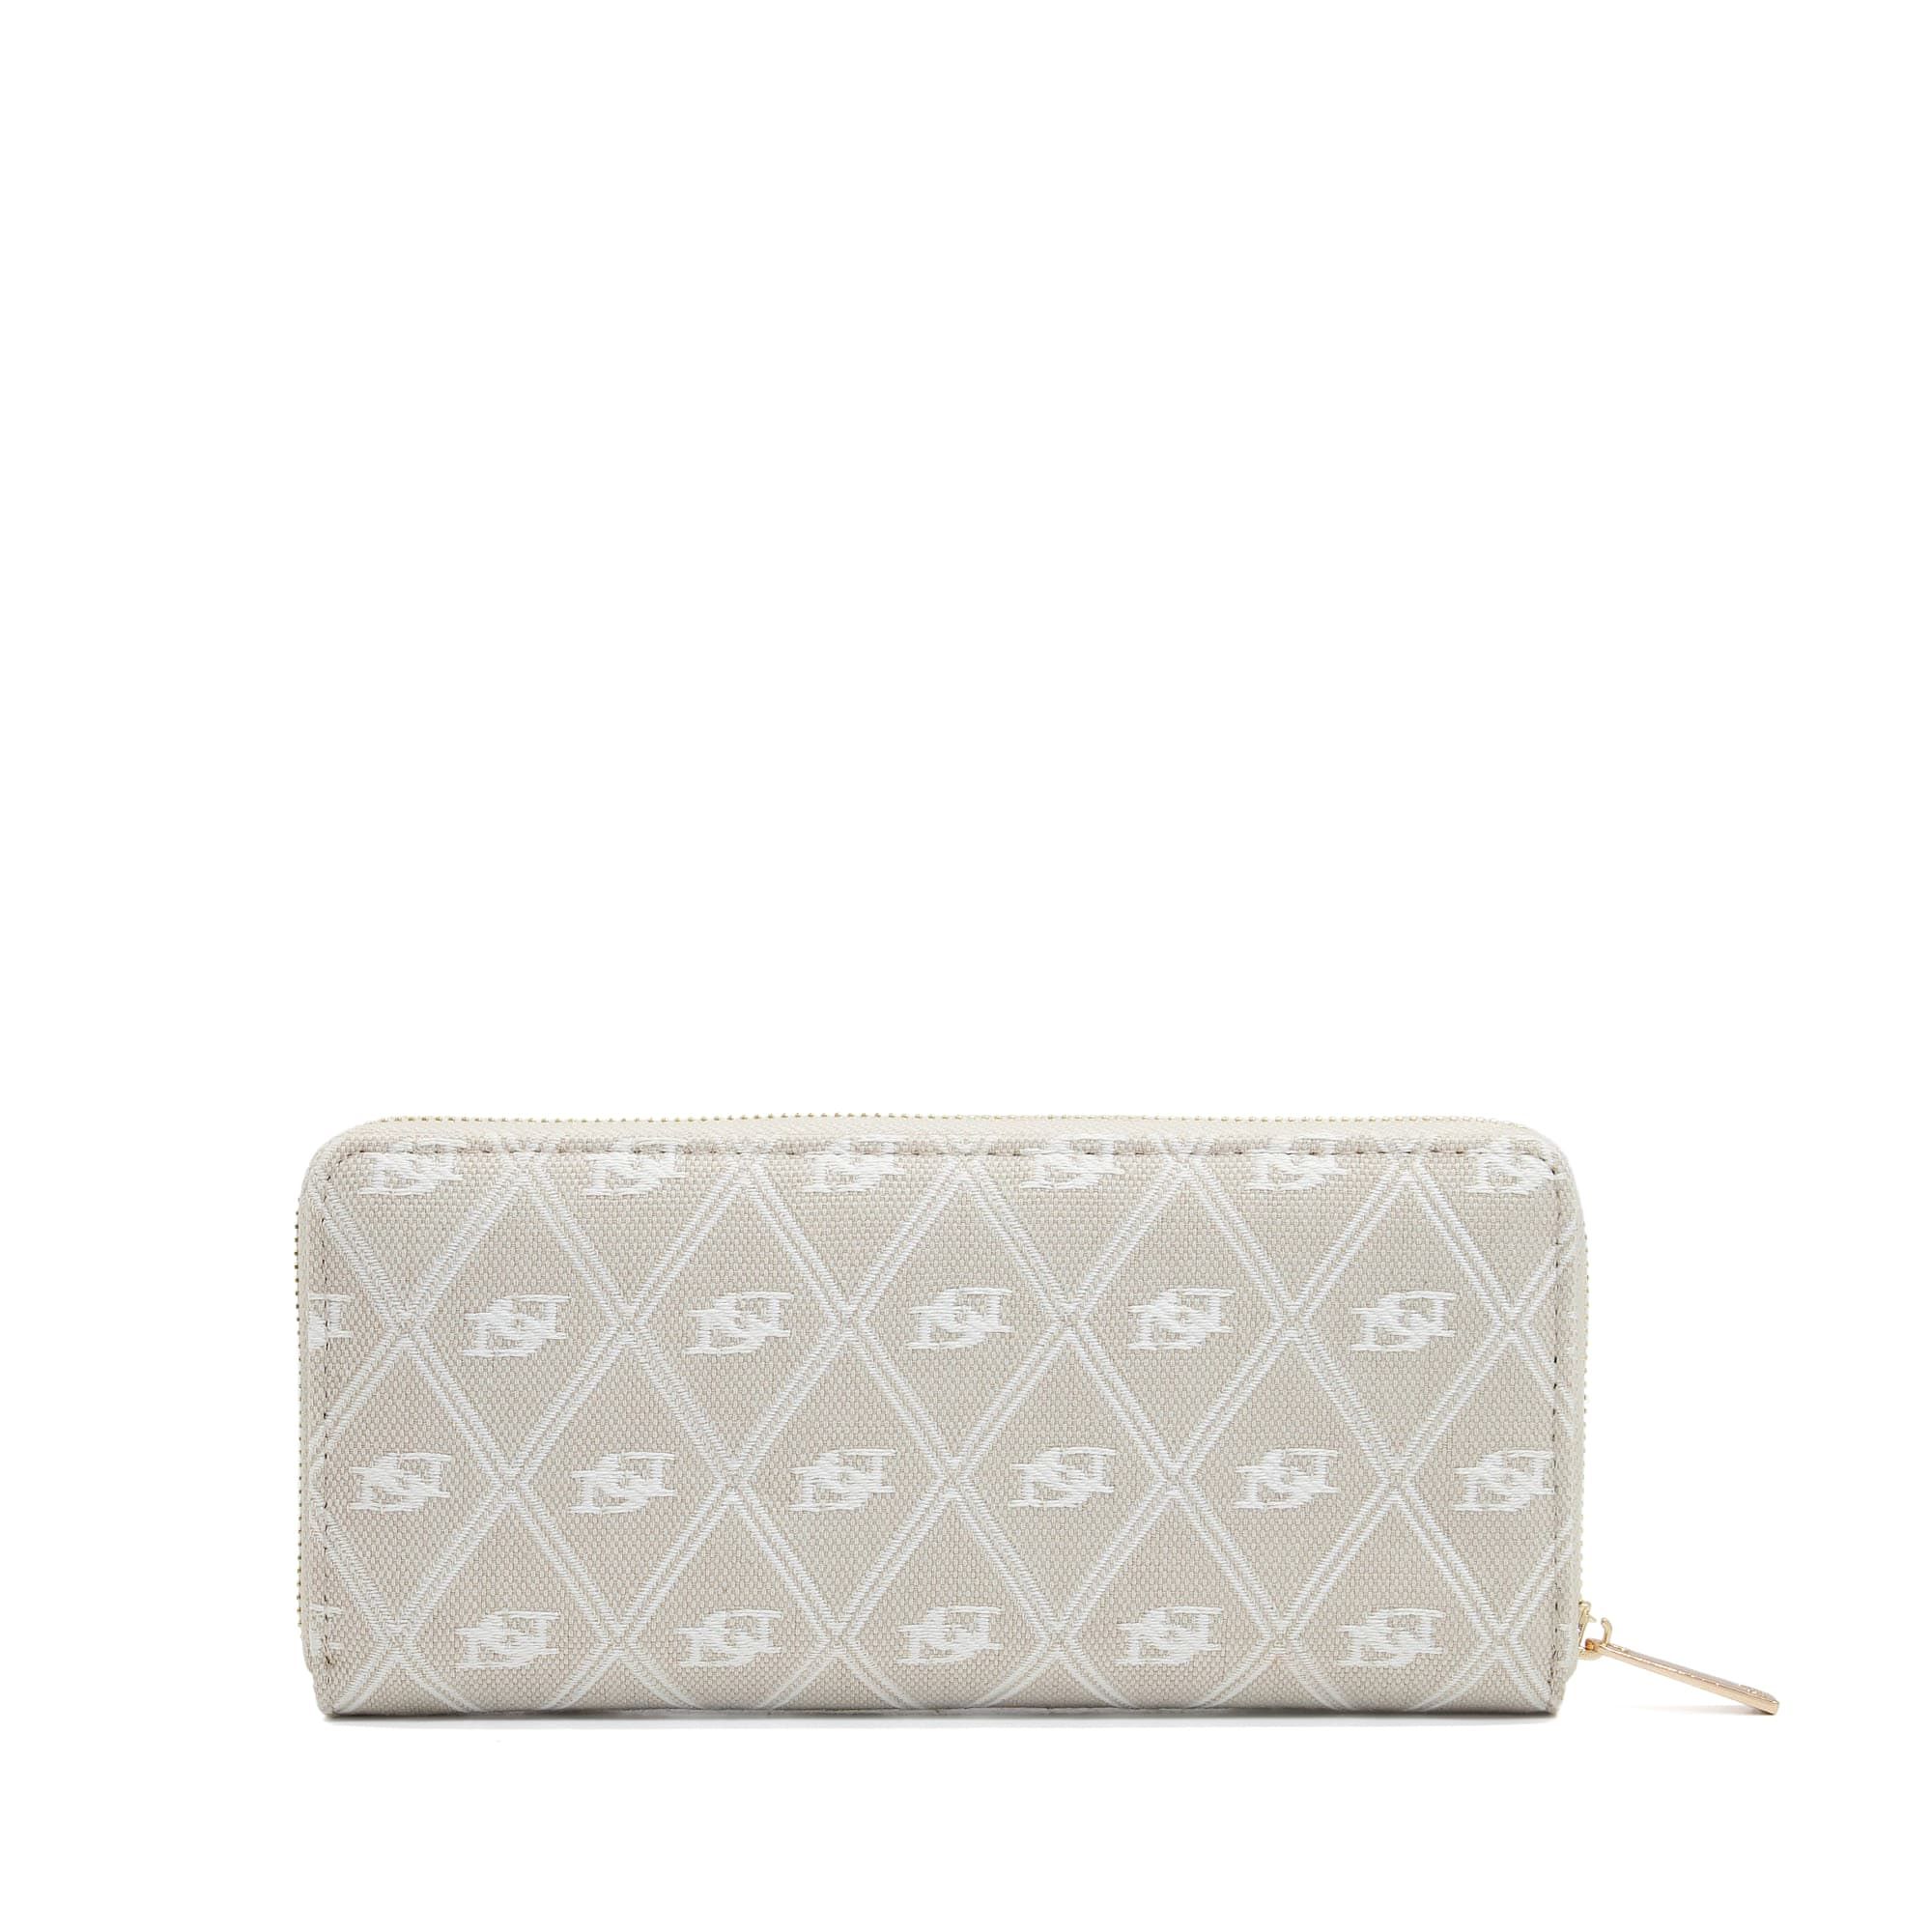 The perfect purse for everyday, this zip style is designed in embroidered textile. There's a compartment for your coins and slots for your cards, as well as a stylish monogram pattern throughout.